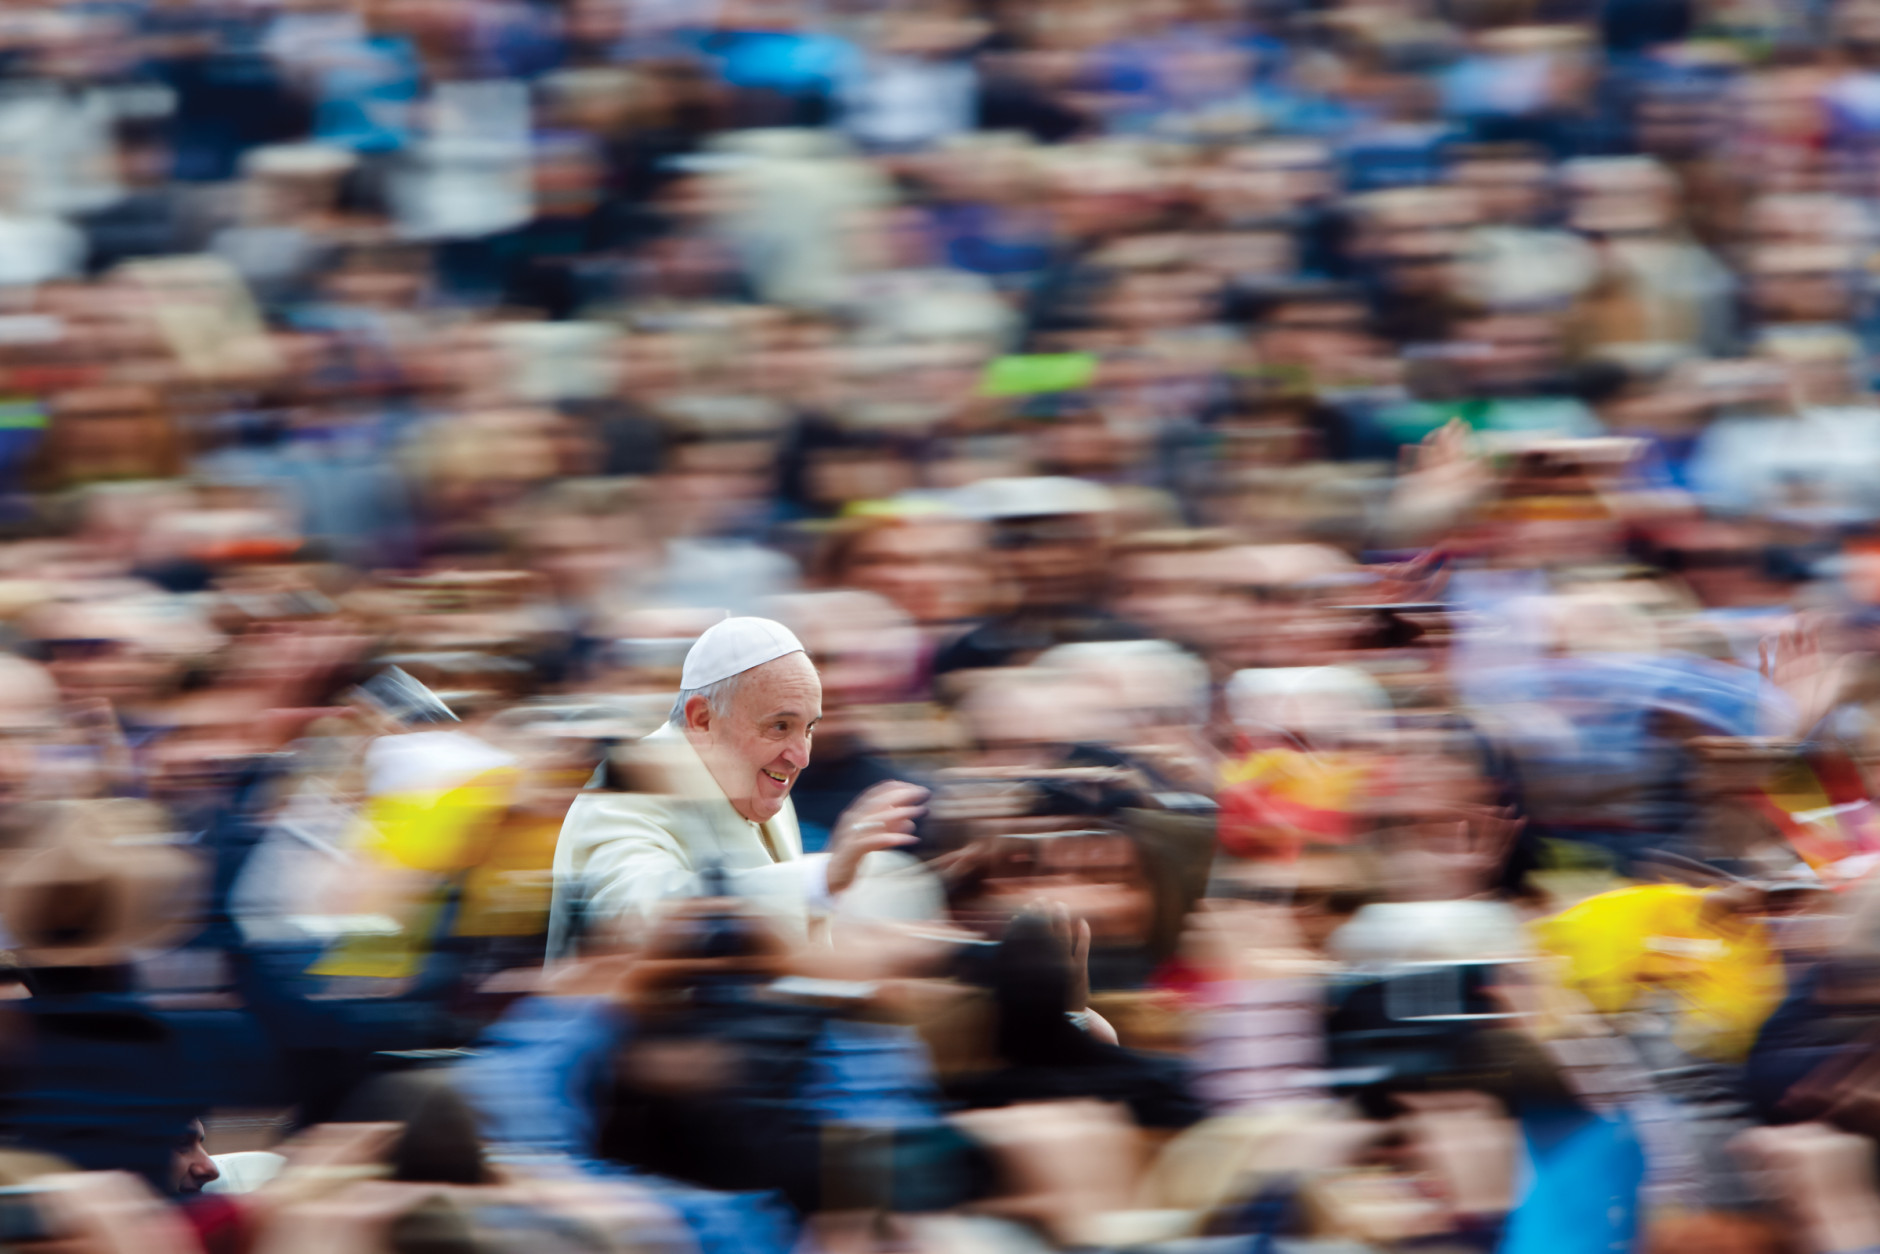 A swirl of pilgrims surround Pope Francis in St. Peter’s Square. (Dave Yoder/National Geographic)